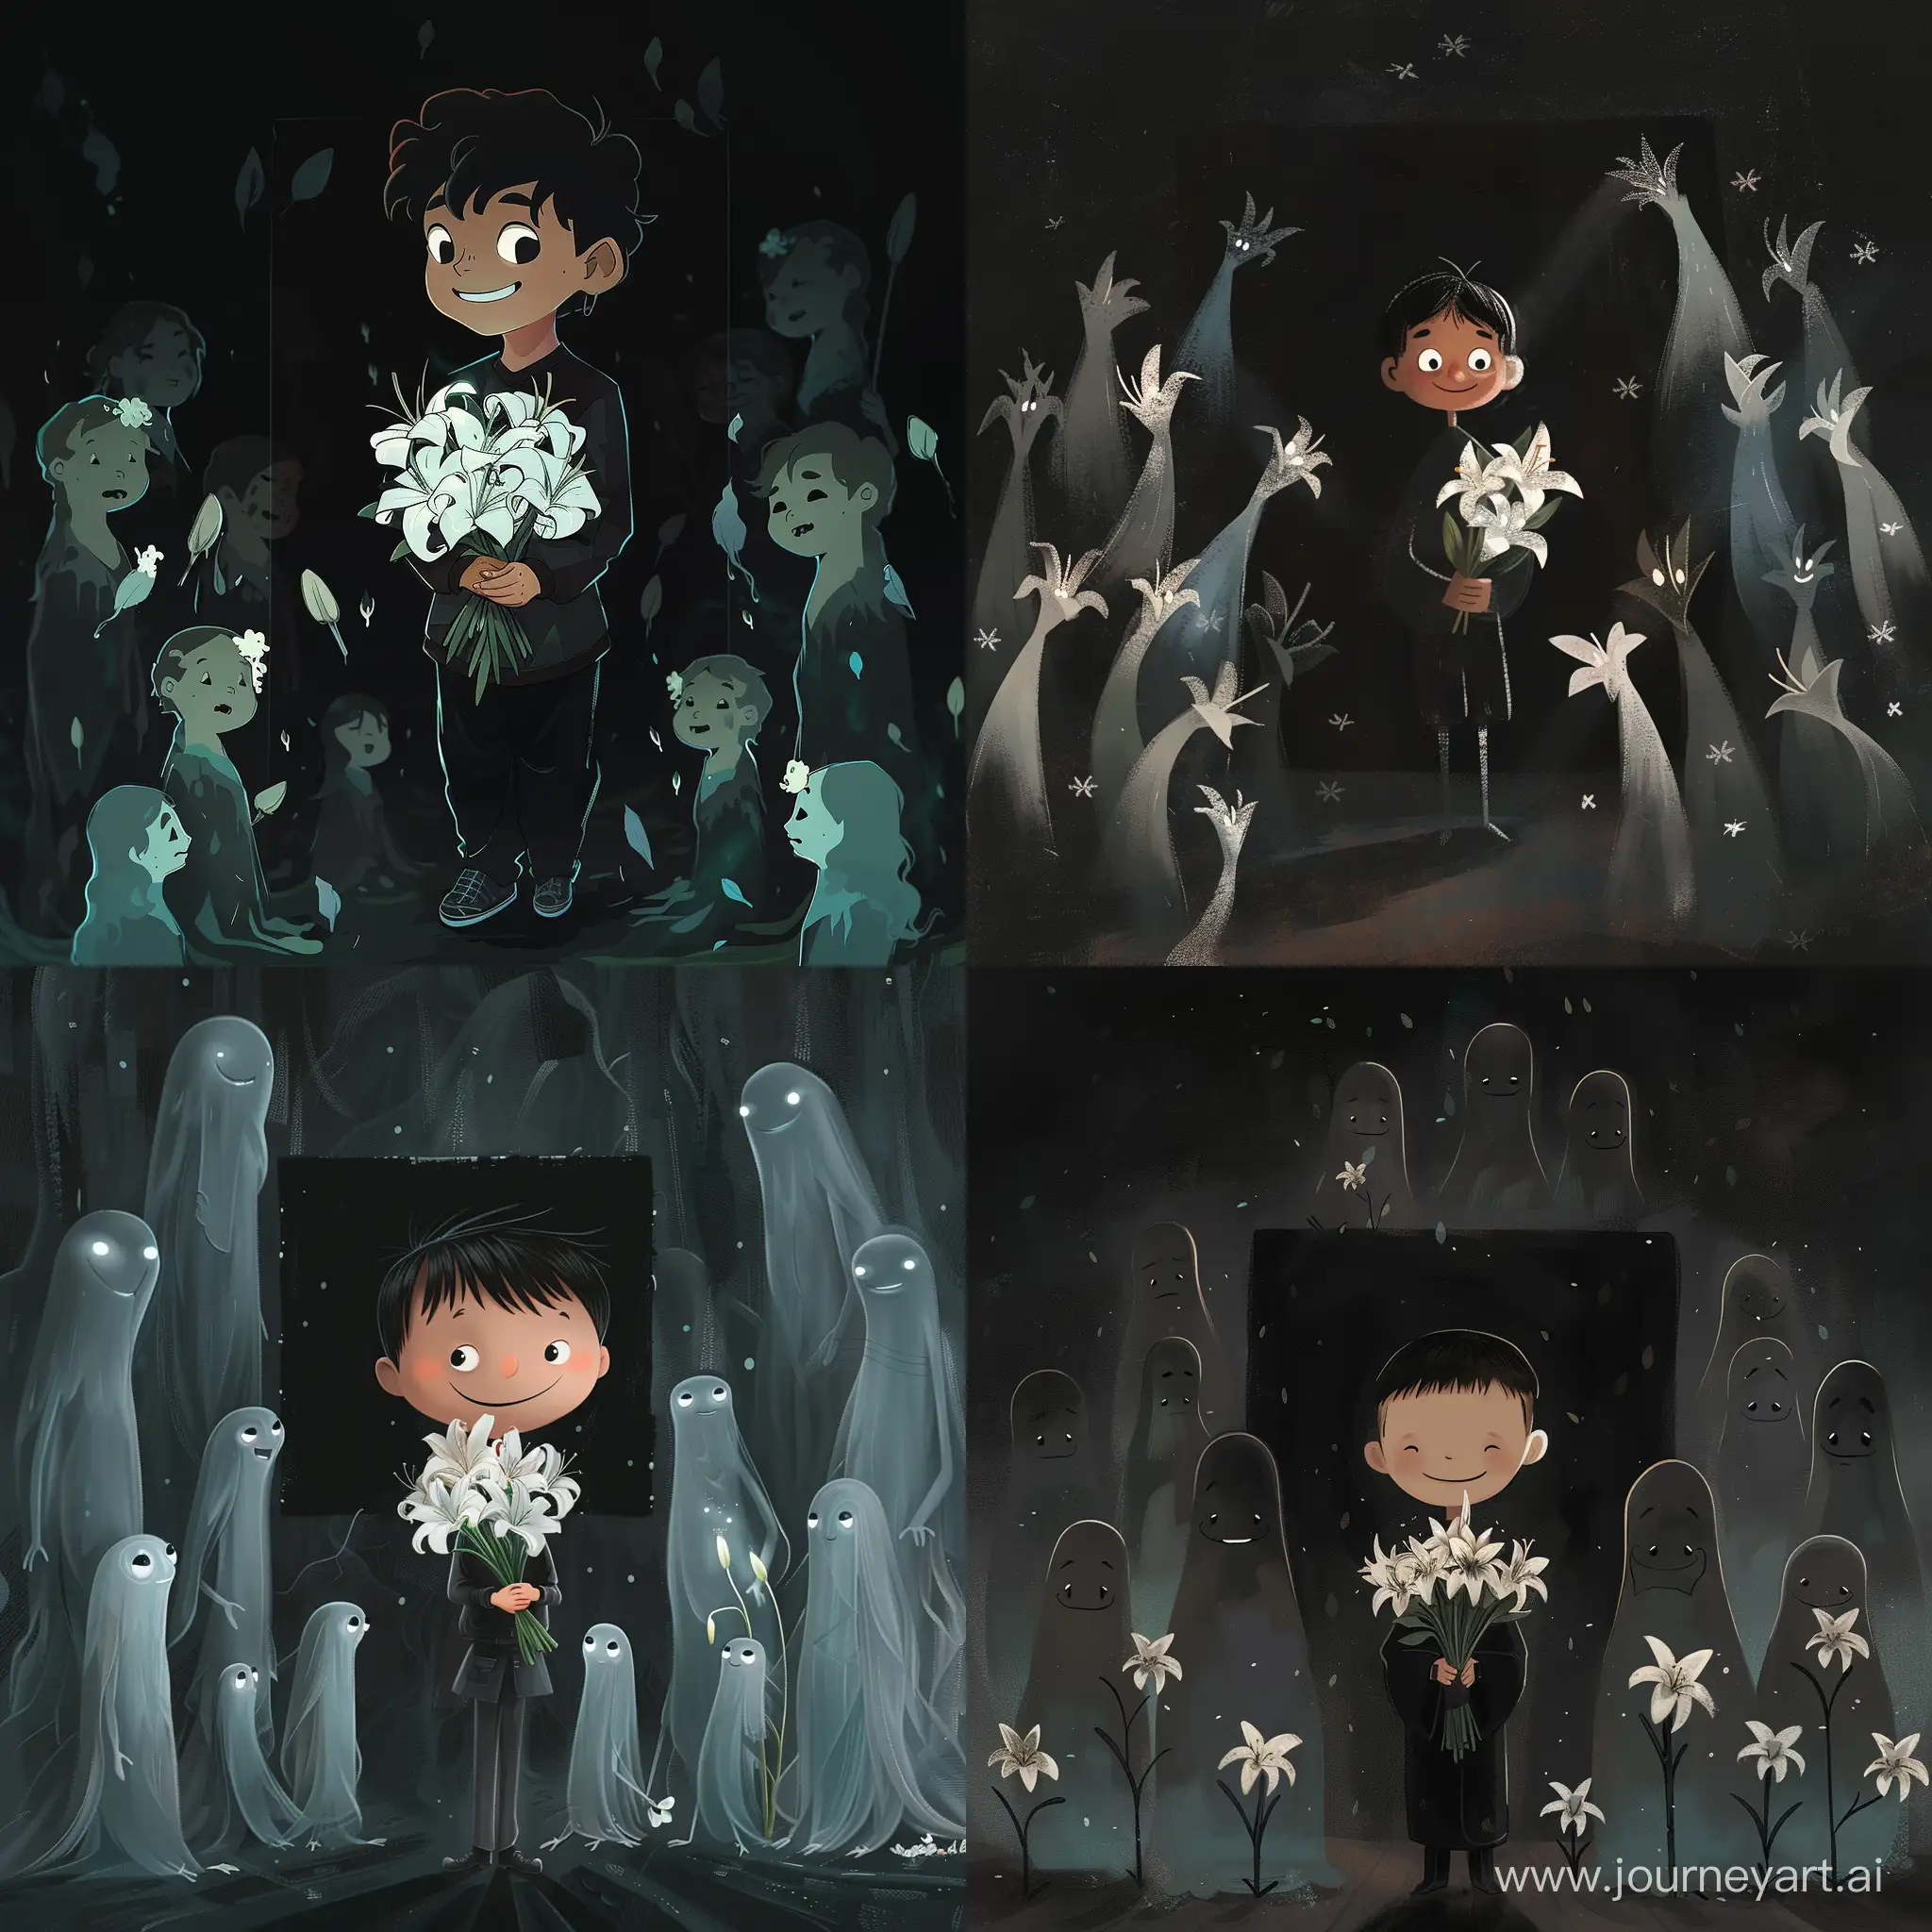 Joyful-Boy-Surrounded-by-Spirits-with-White-Lilies-in-a-Black-Square-Room